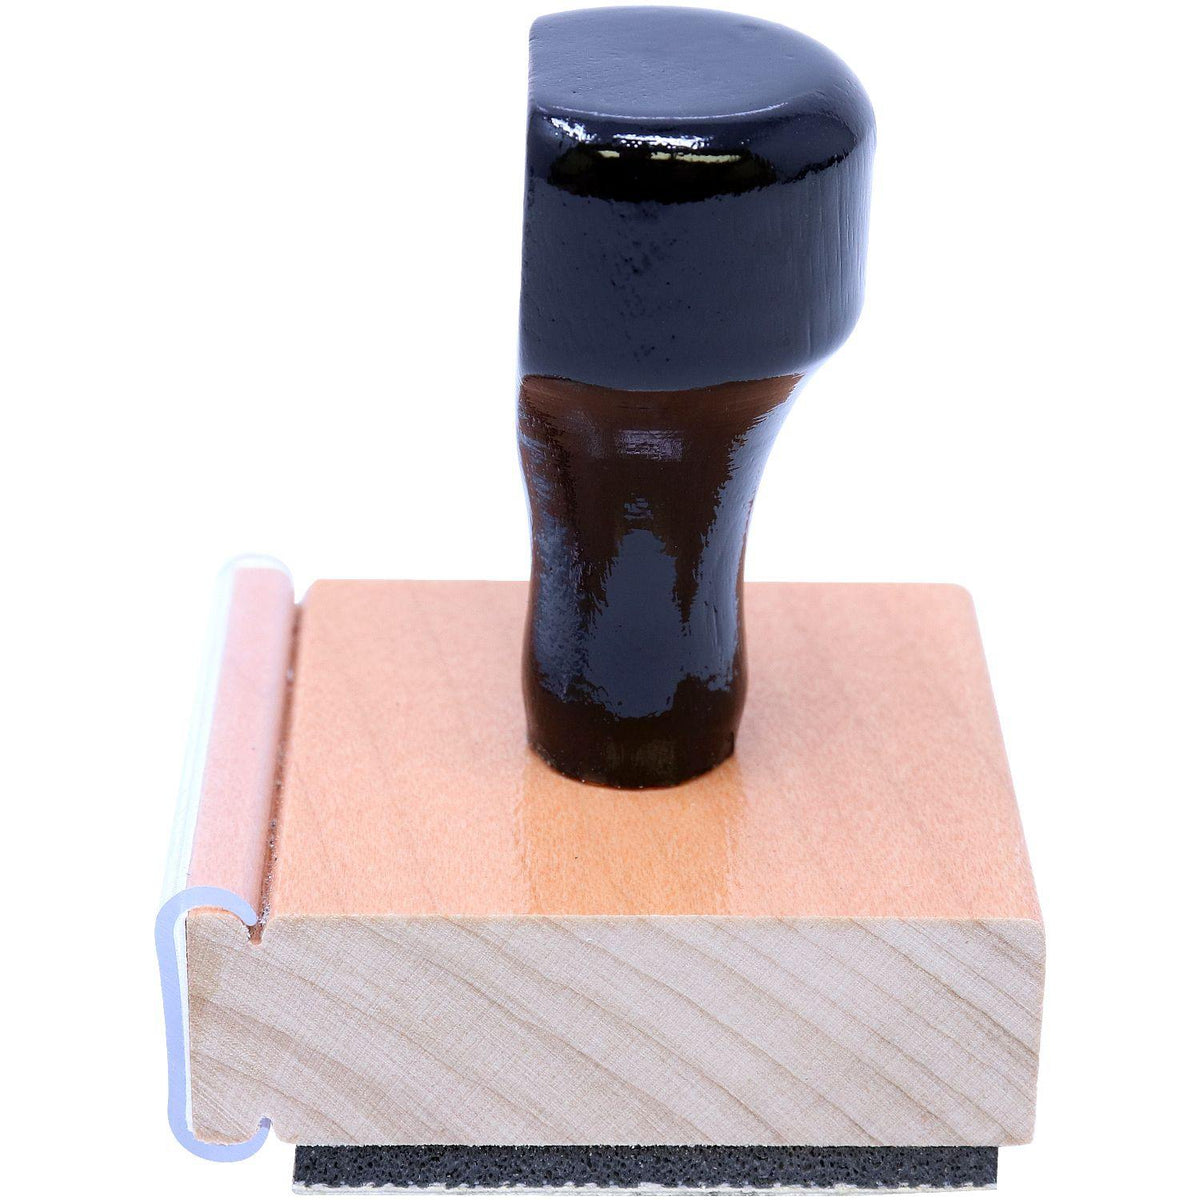 Professional Regular Rubber Stamp of Seal - Engineer Seal Stamps - Stamp Type_Hand Stamp, Type of Use_Professional